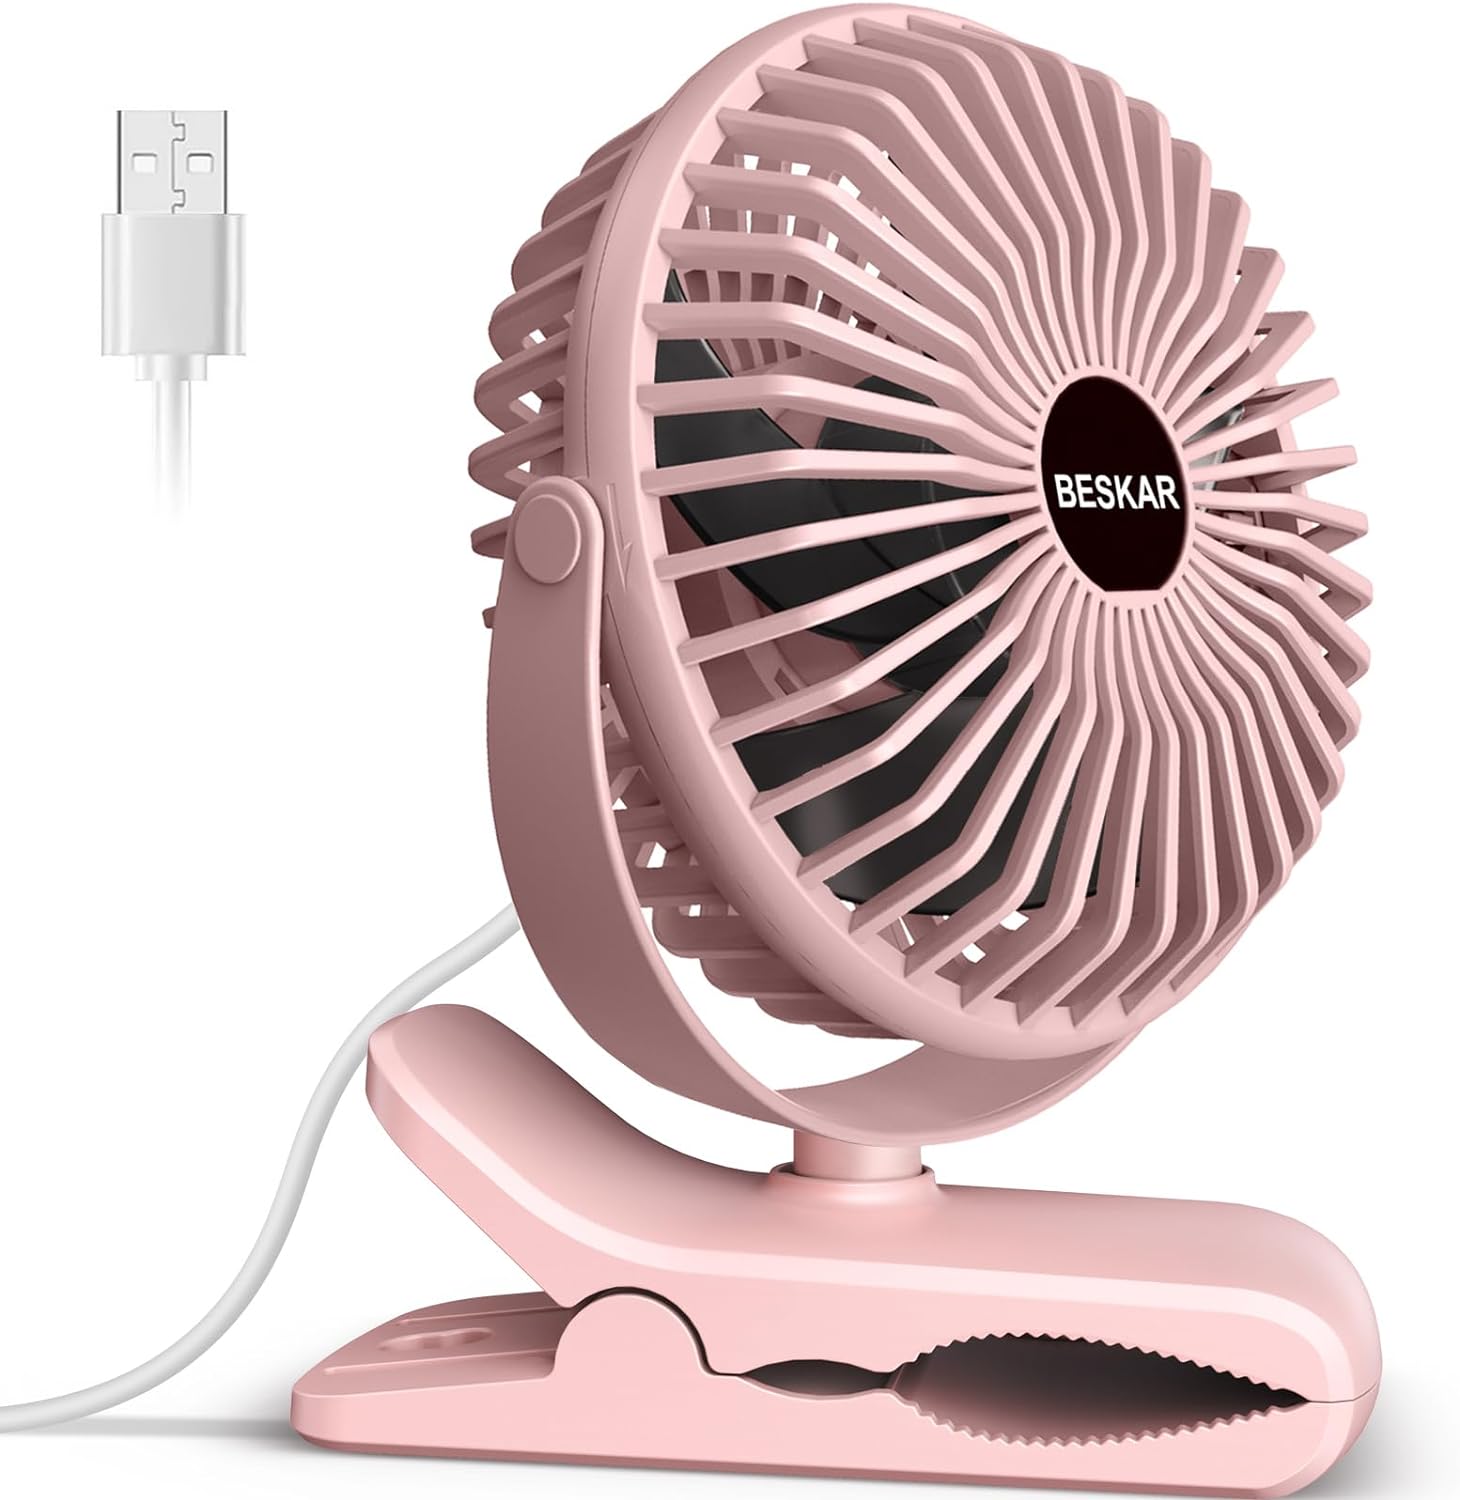 BESKAR Portable Small Clip on Fan with USB Cord Powered, 3 Speeds Strong Airflow, Personal Fan with Sturdy Clamp, Quiet Desk & Clip Fan, No Battery